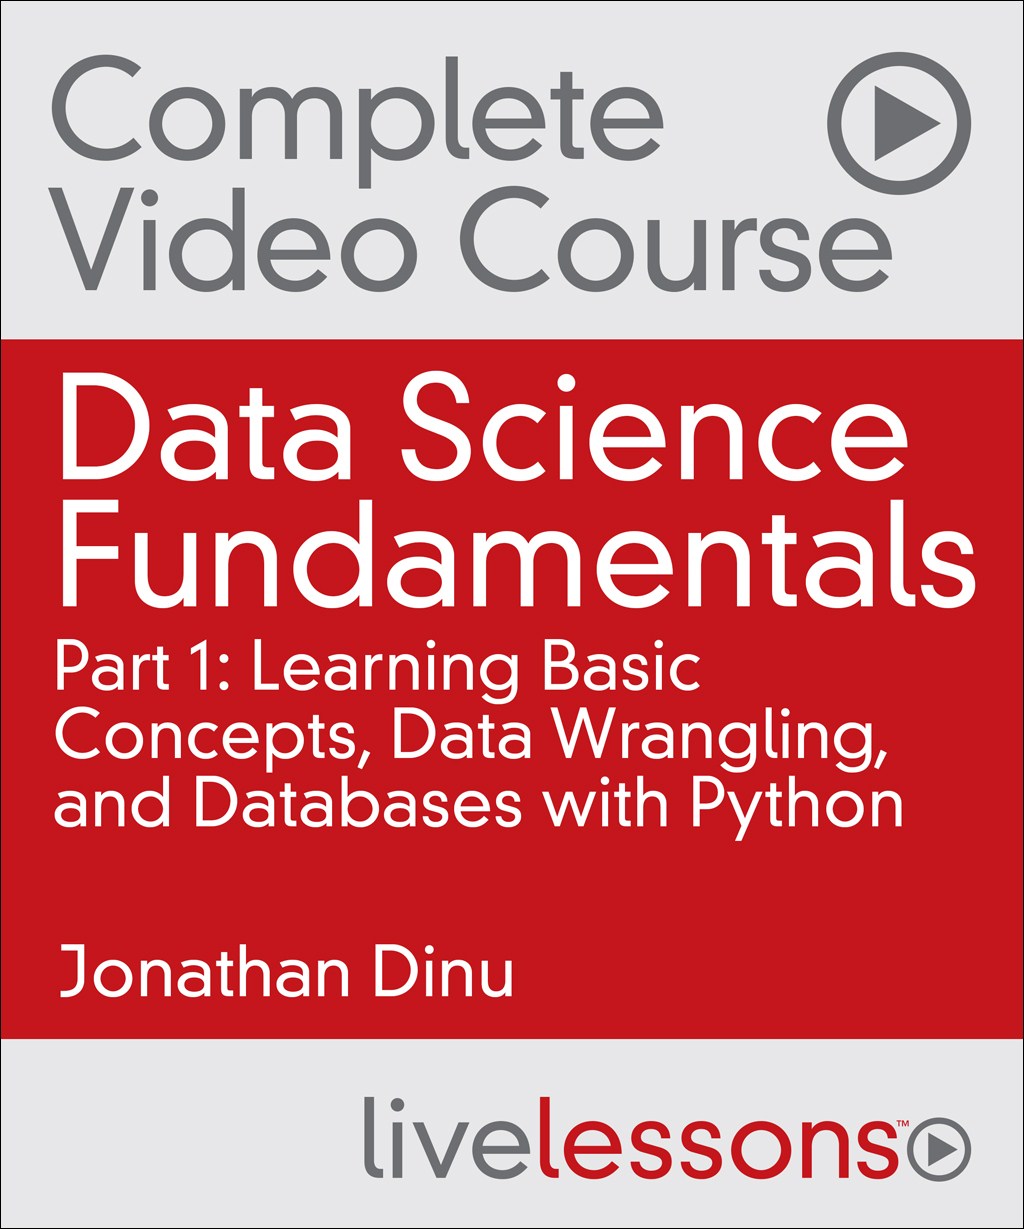 Data Science Fundamentals Part 1, Complete Video Course: Learning Basic Concepts, Data Wrangling, and Databases with Python